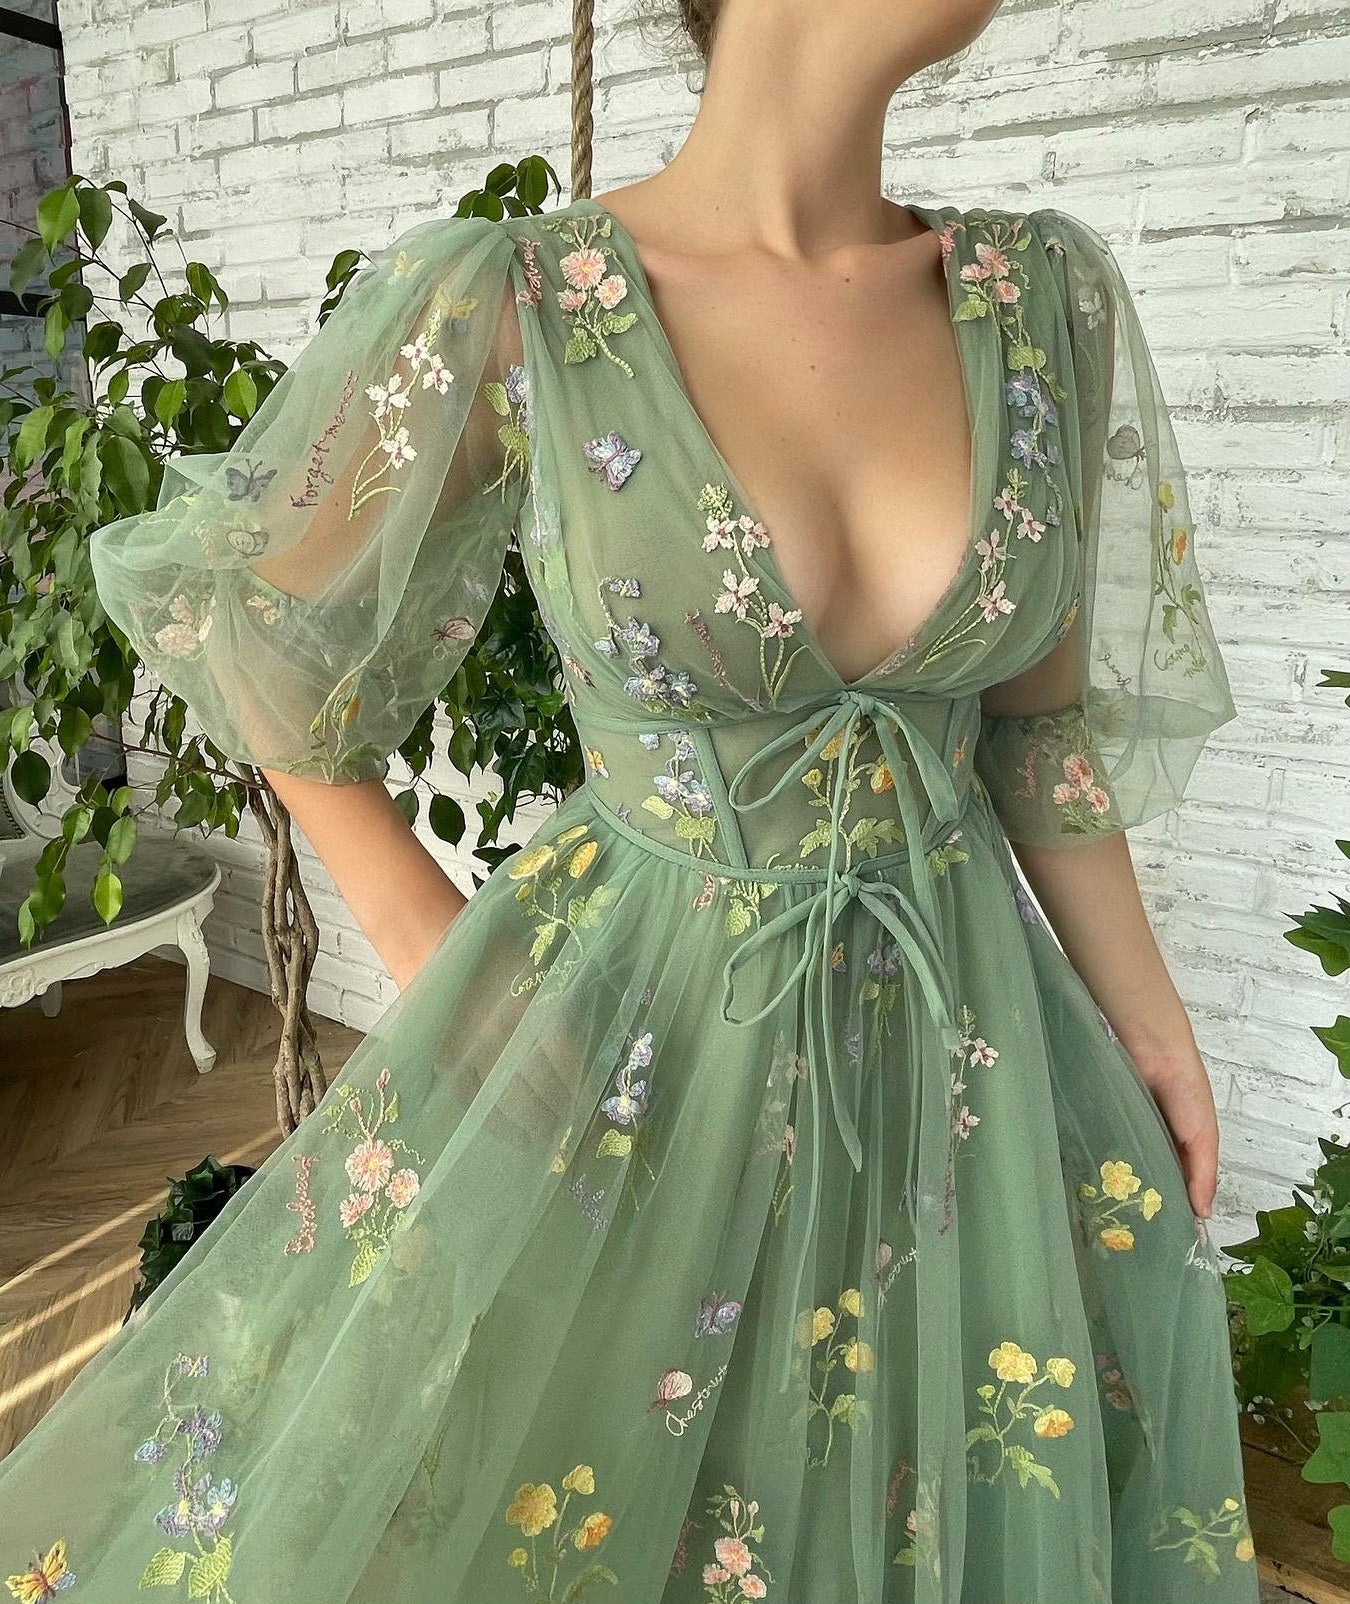 green dress with flowers